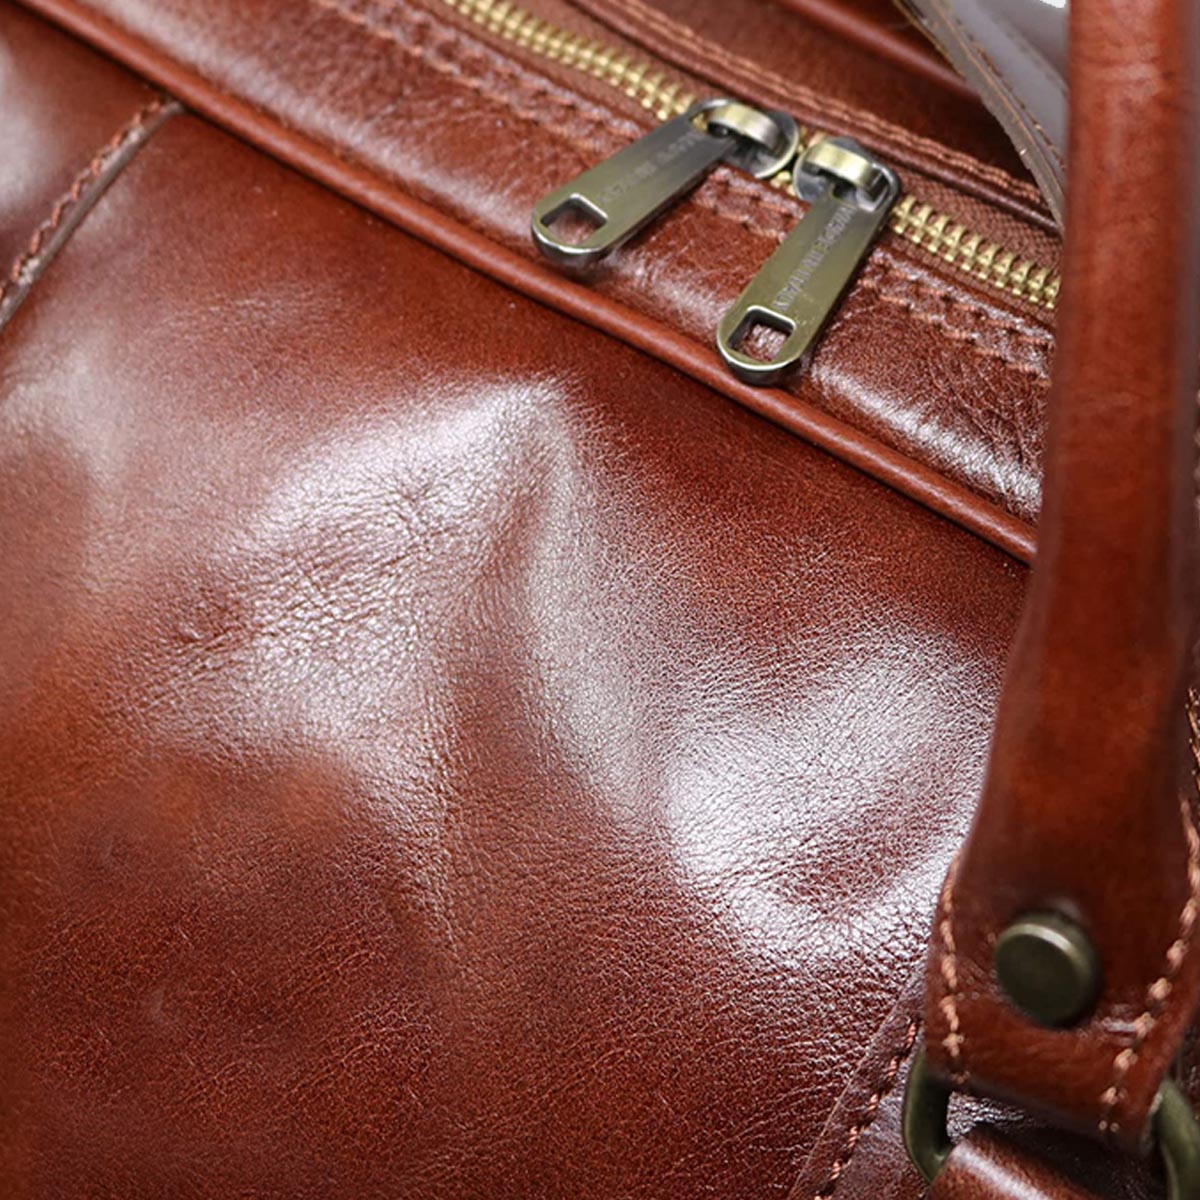 Classic Brown Leather Duffle Bag for Weekend (5)